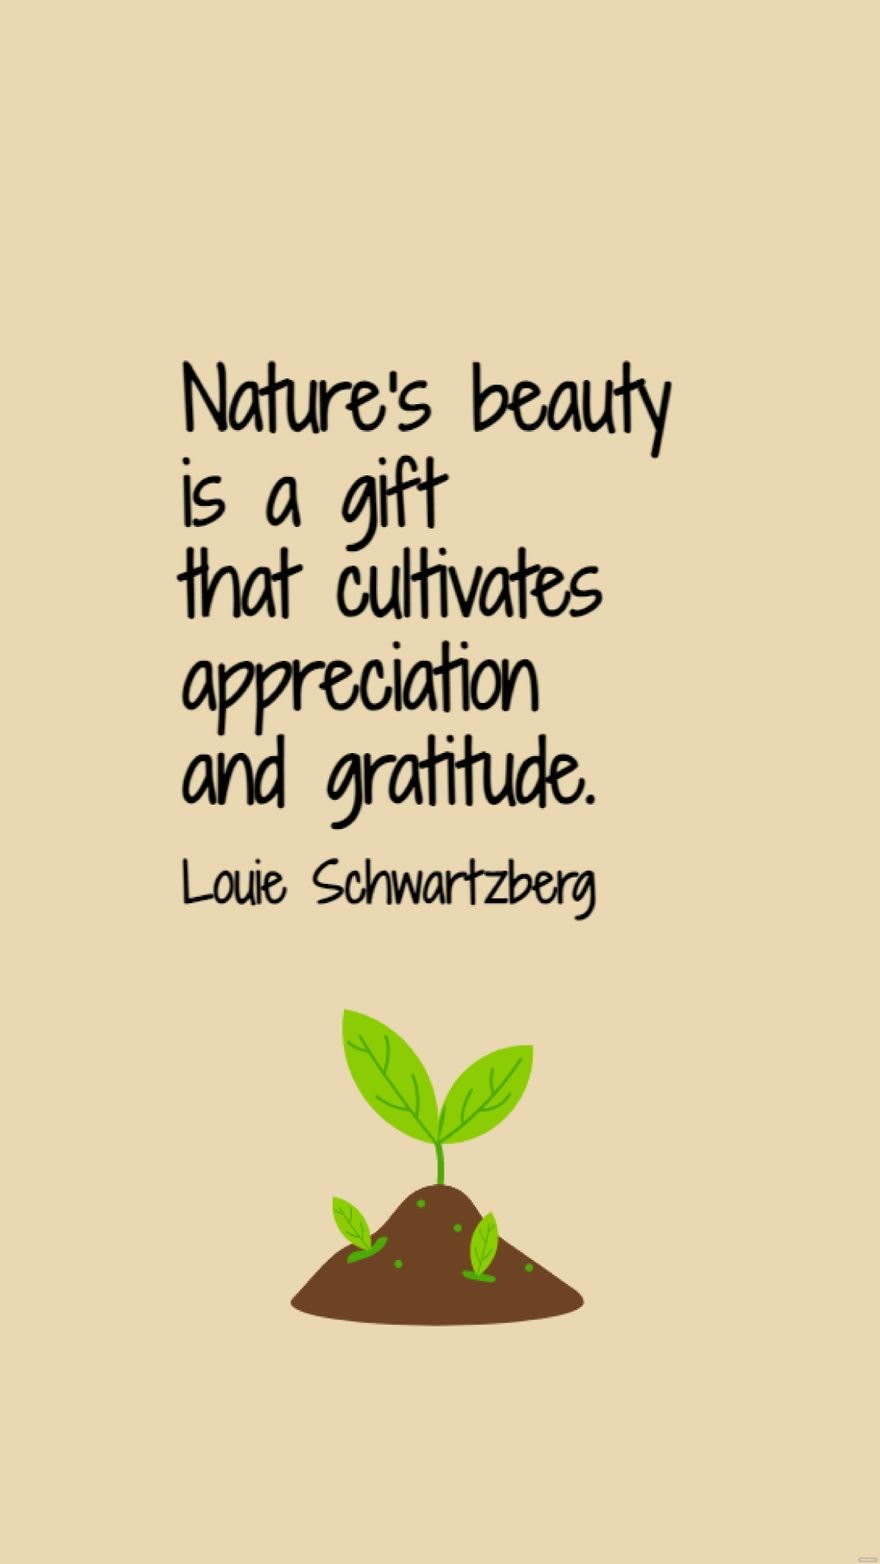 Louie Schwartzberg - Nature's beauty is a gift that cultivates appreciation and gratitude. in JPG